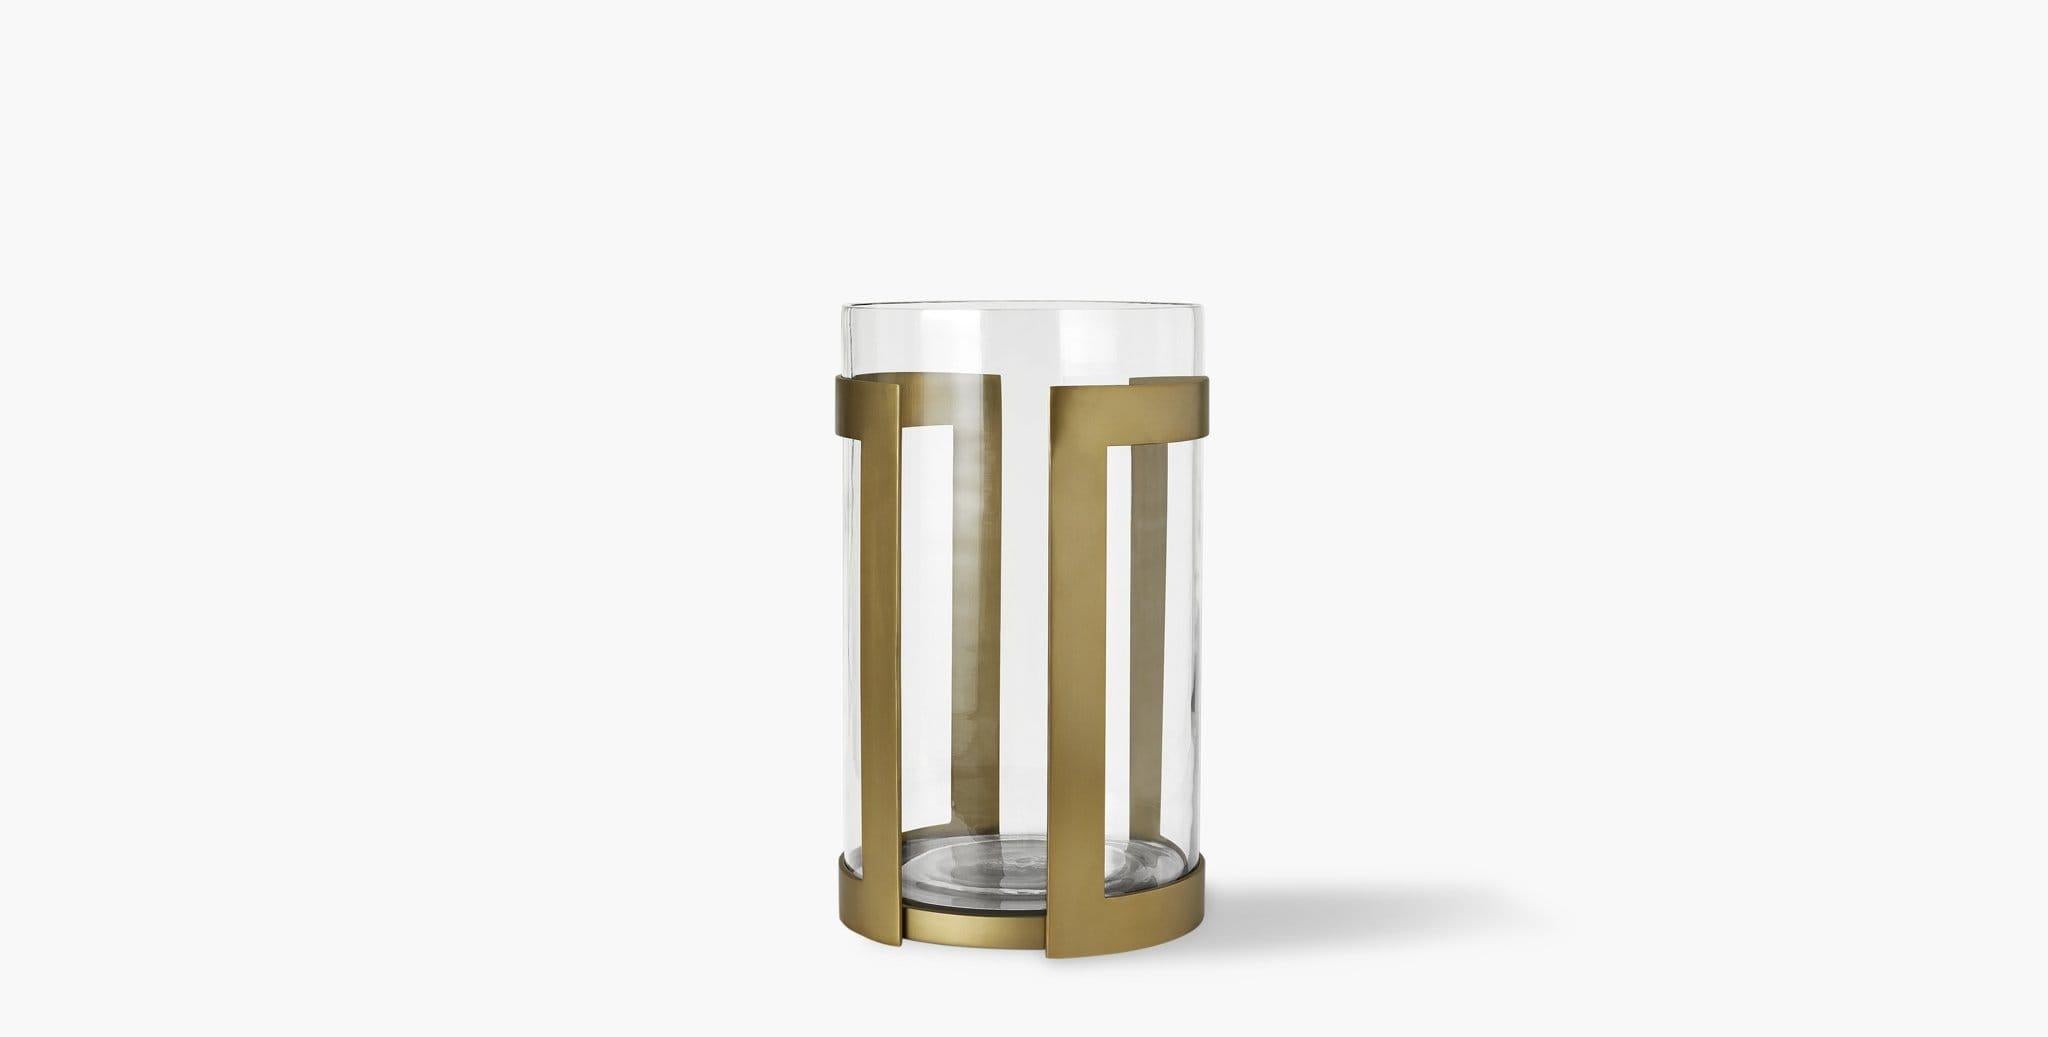 Our Thorne Brass Hurricane Candle Holder brilliantly showcases the glow of pillar candles in its minimal brass frame paired with a glass insert. Our handcrafted finishes are inspired by variations within natural textures. Each selection is slightly